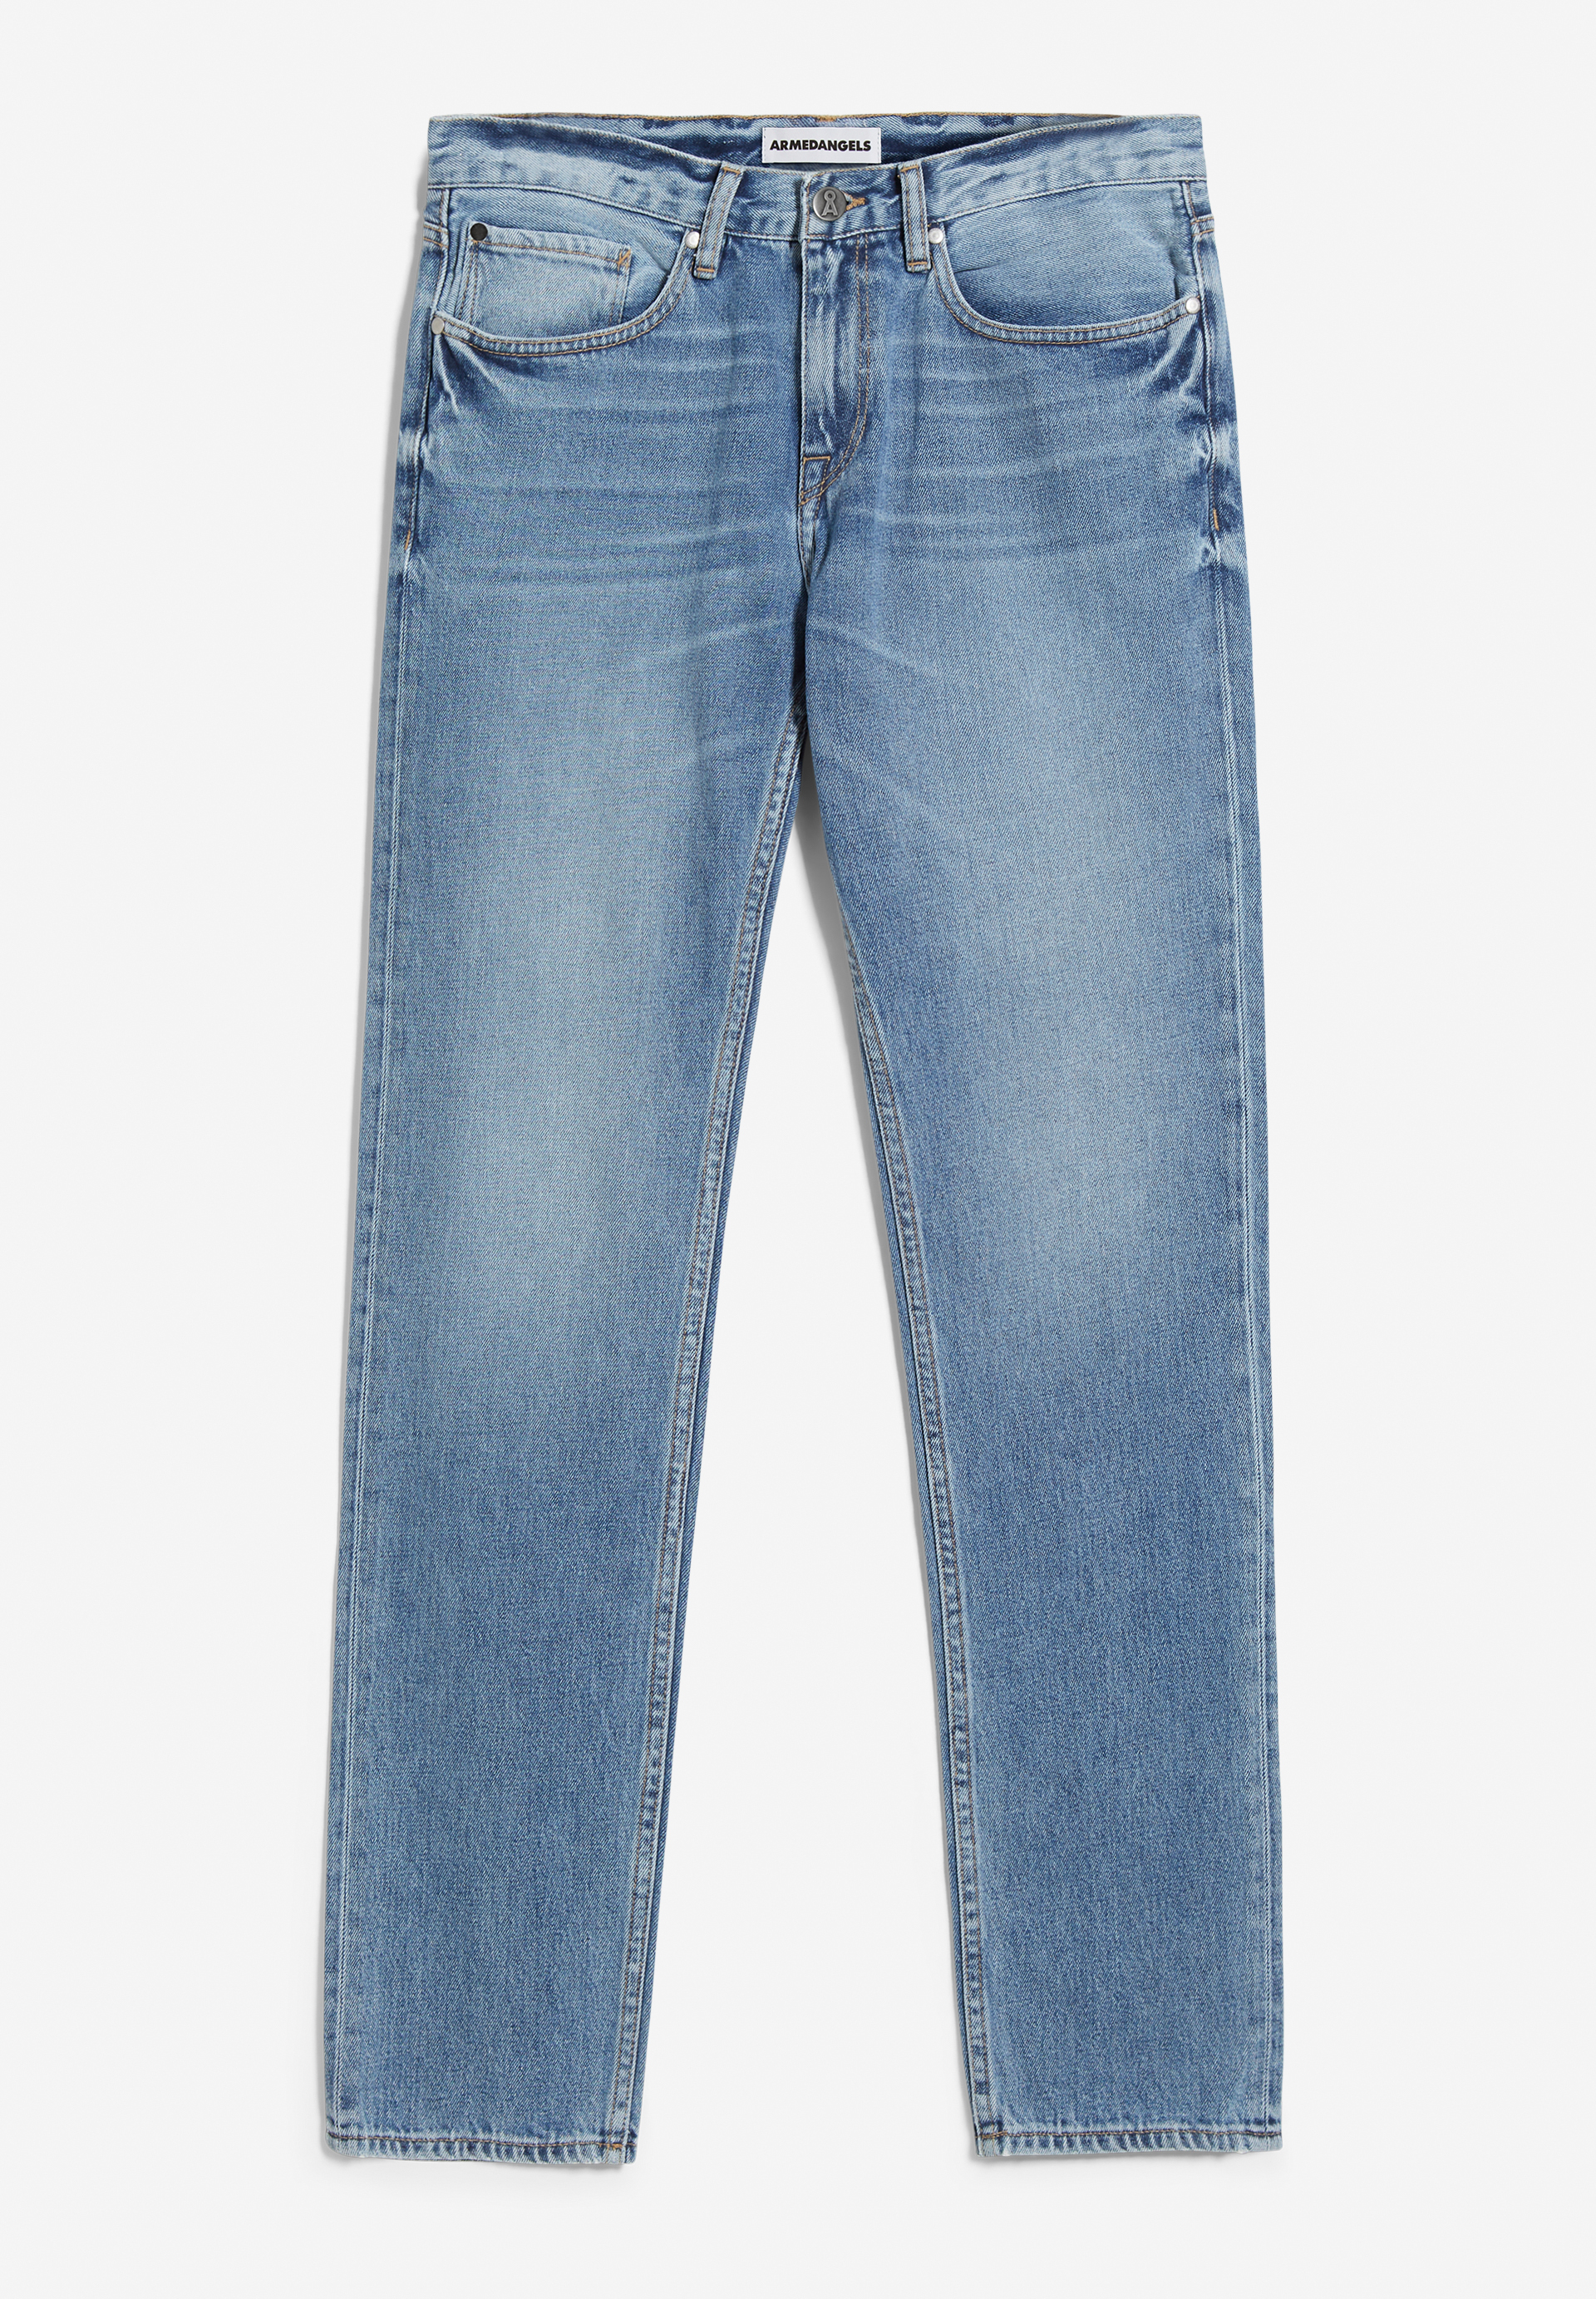 DYLAANO Straight Fit Denim made of Organic Cotton